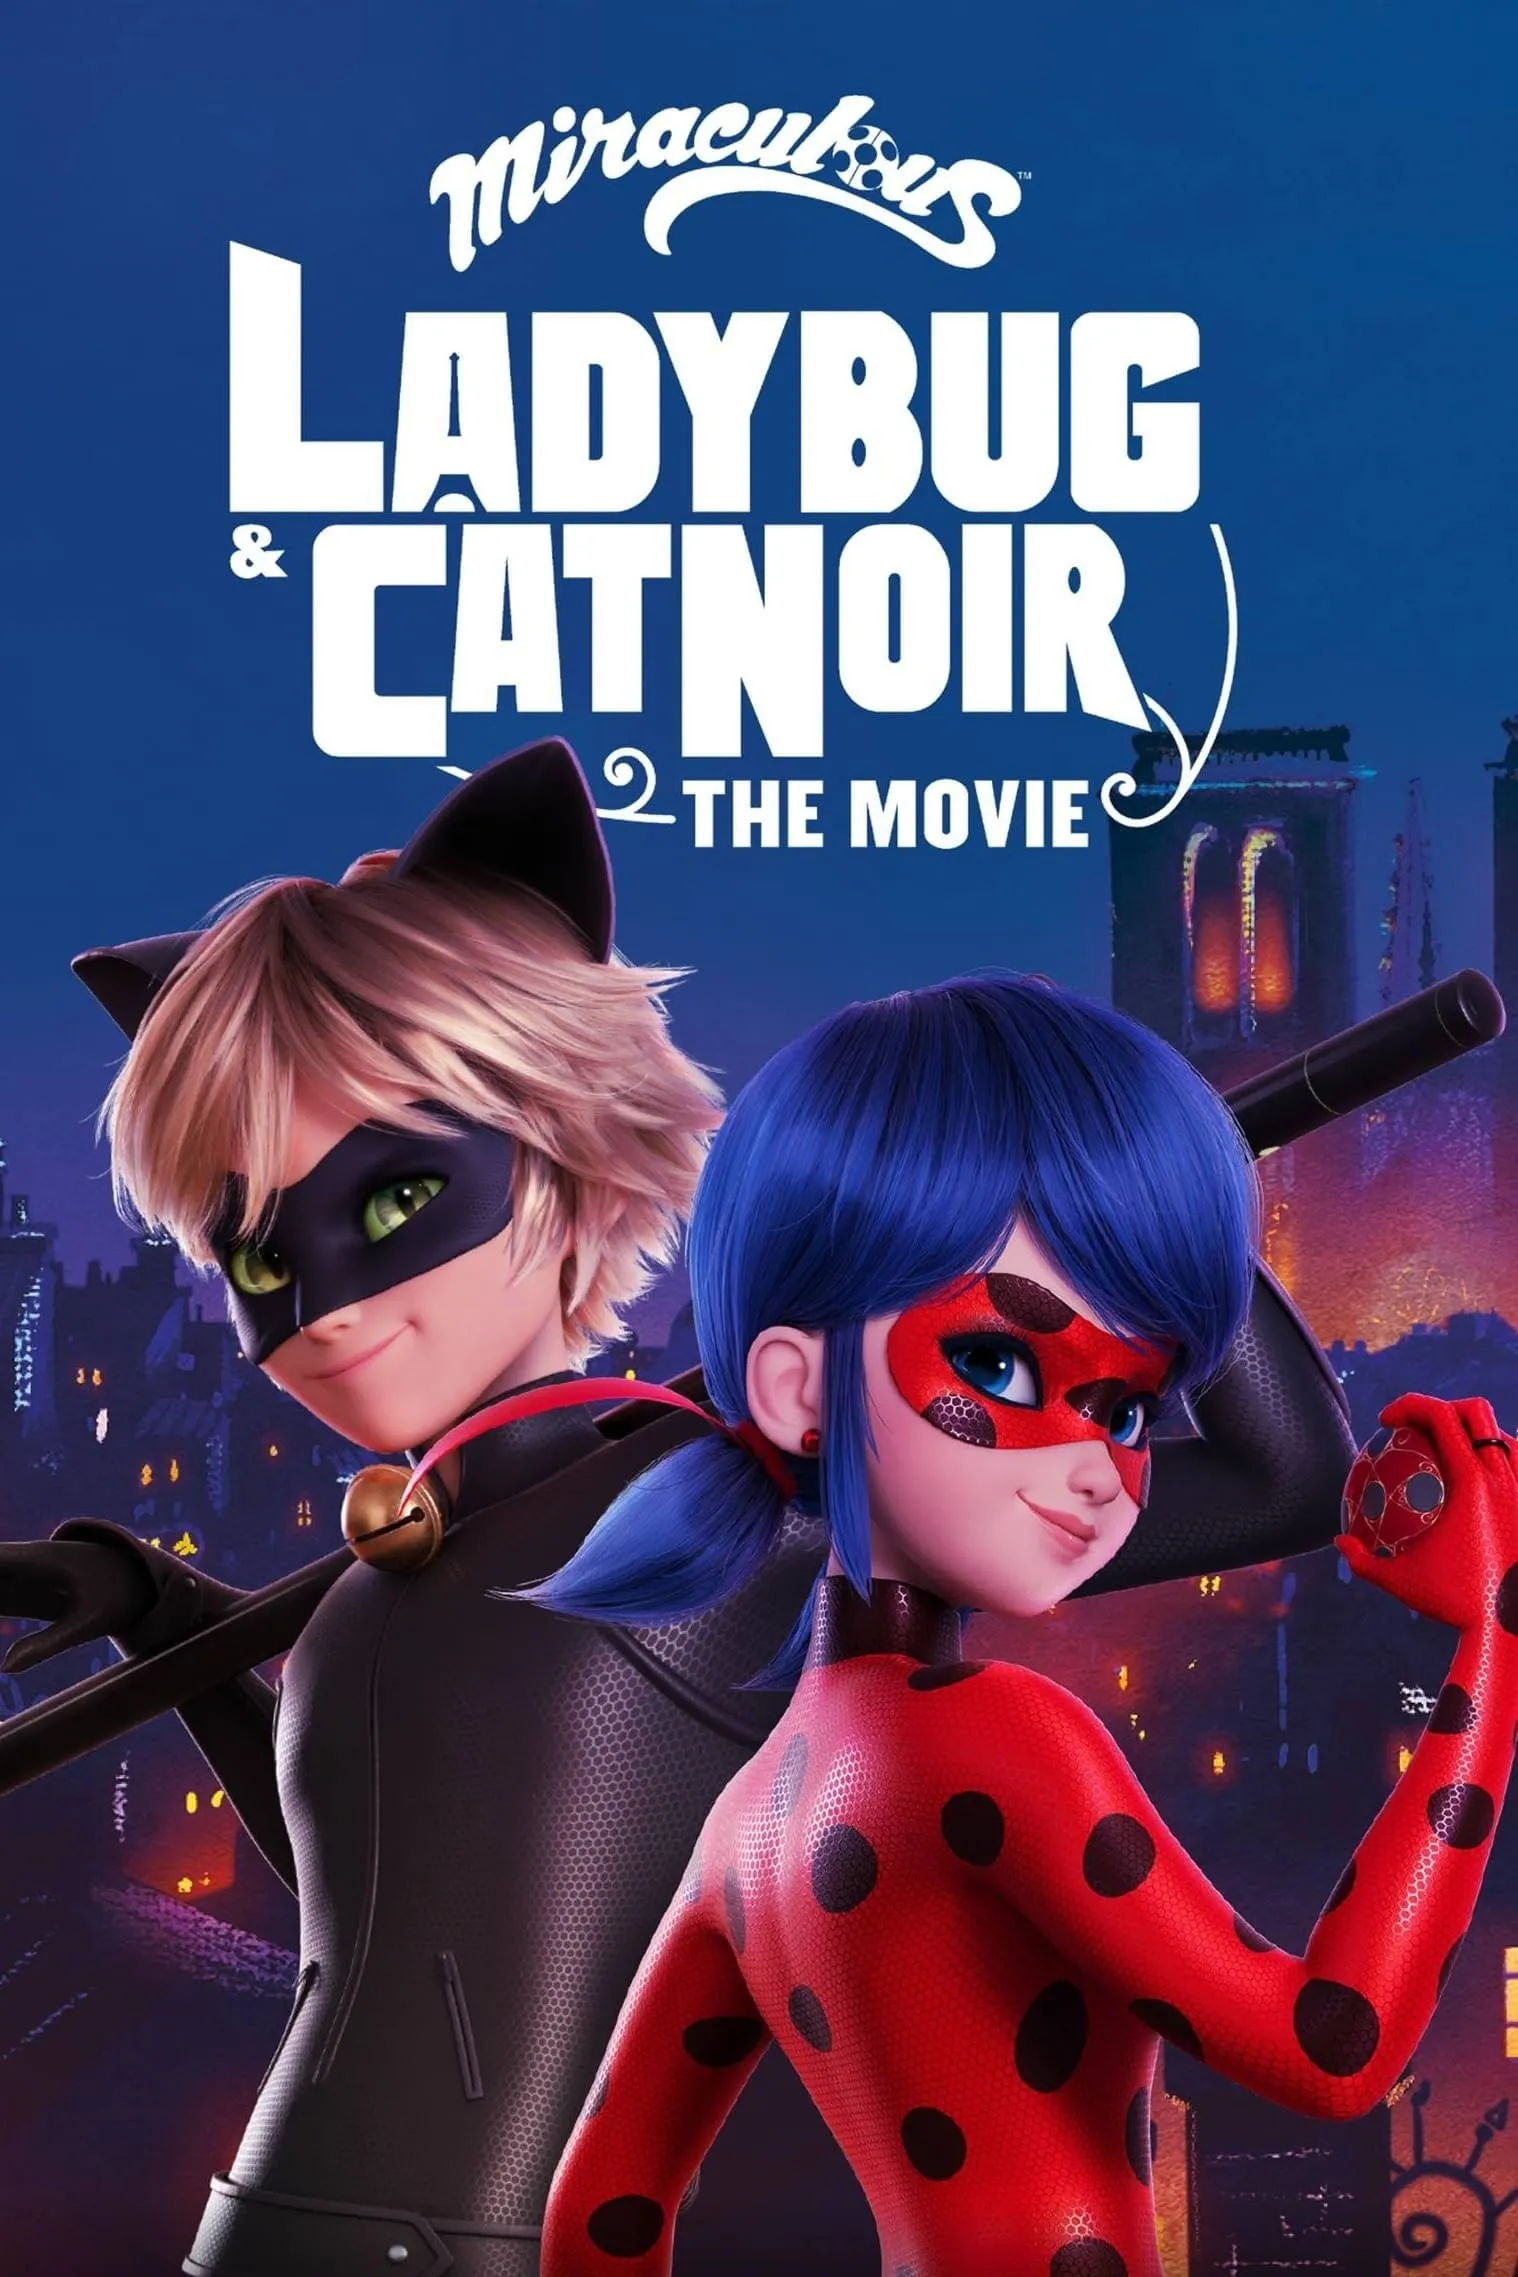 LADYBUG AND CAT NOIR 2 MOVIE CONFIRMED!! 🐞🐱 